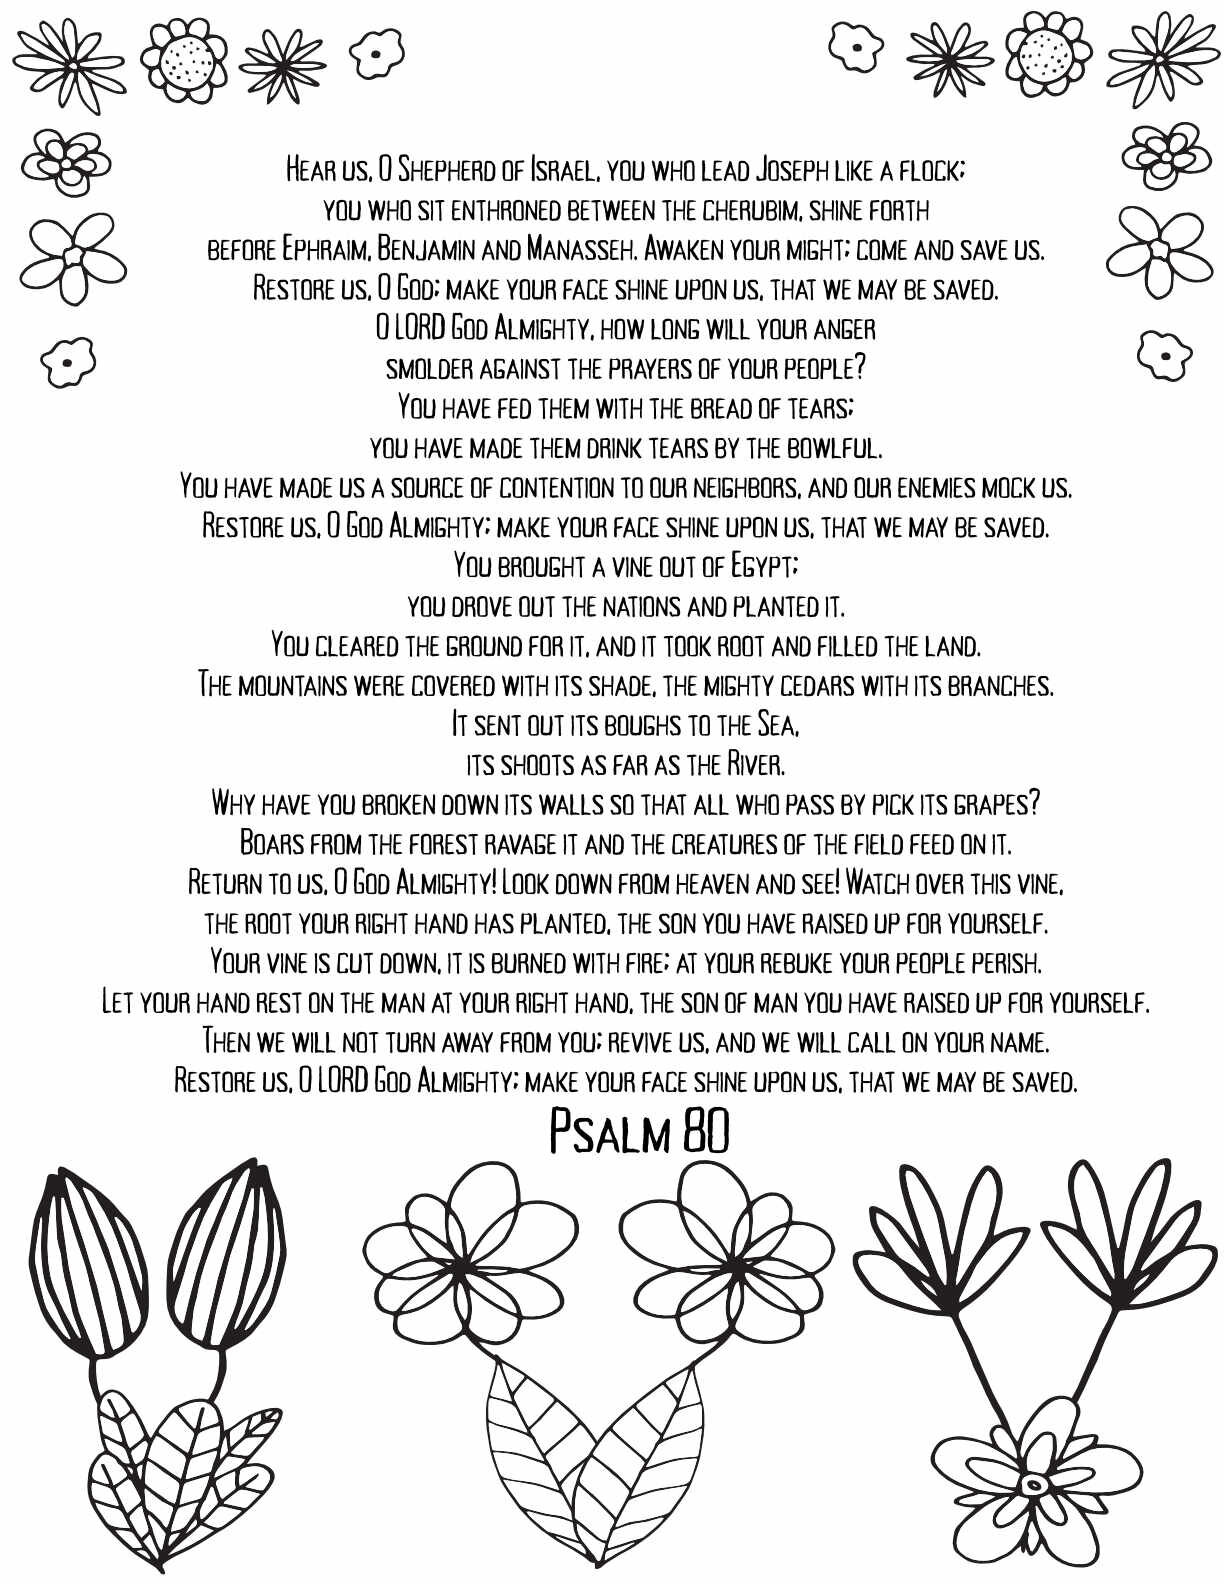 10 Free Printable Psalm Coloring Pages - Download and Color Adult Scripture - Psalm 80CLICK HERE TO DOWNLOAD THIS PAGE FREE